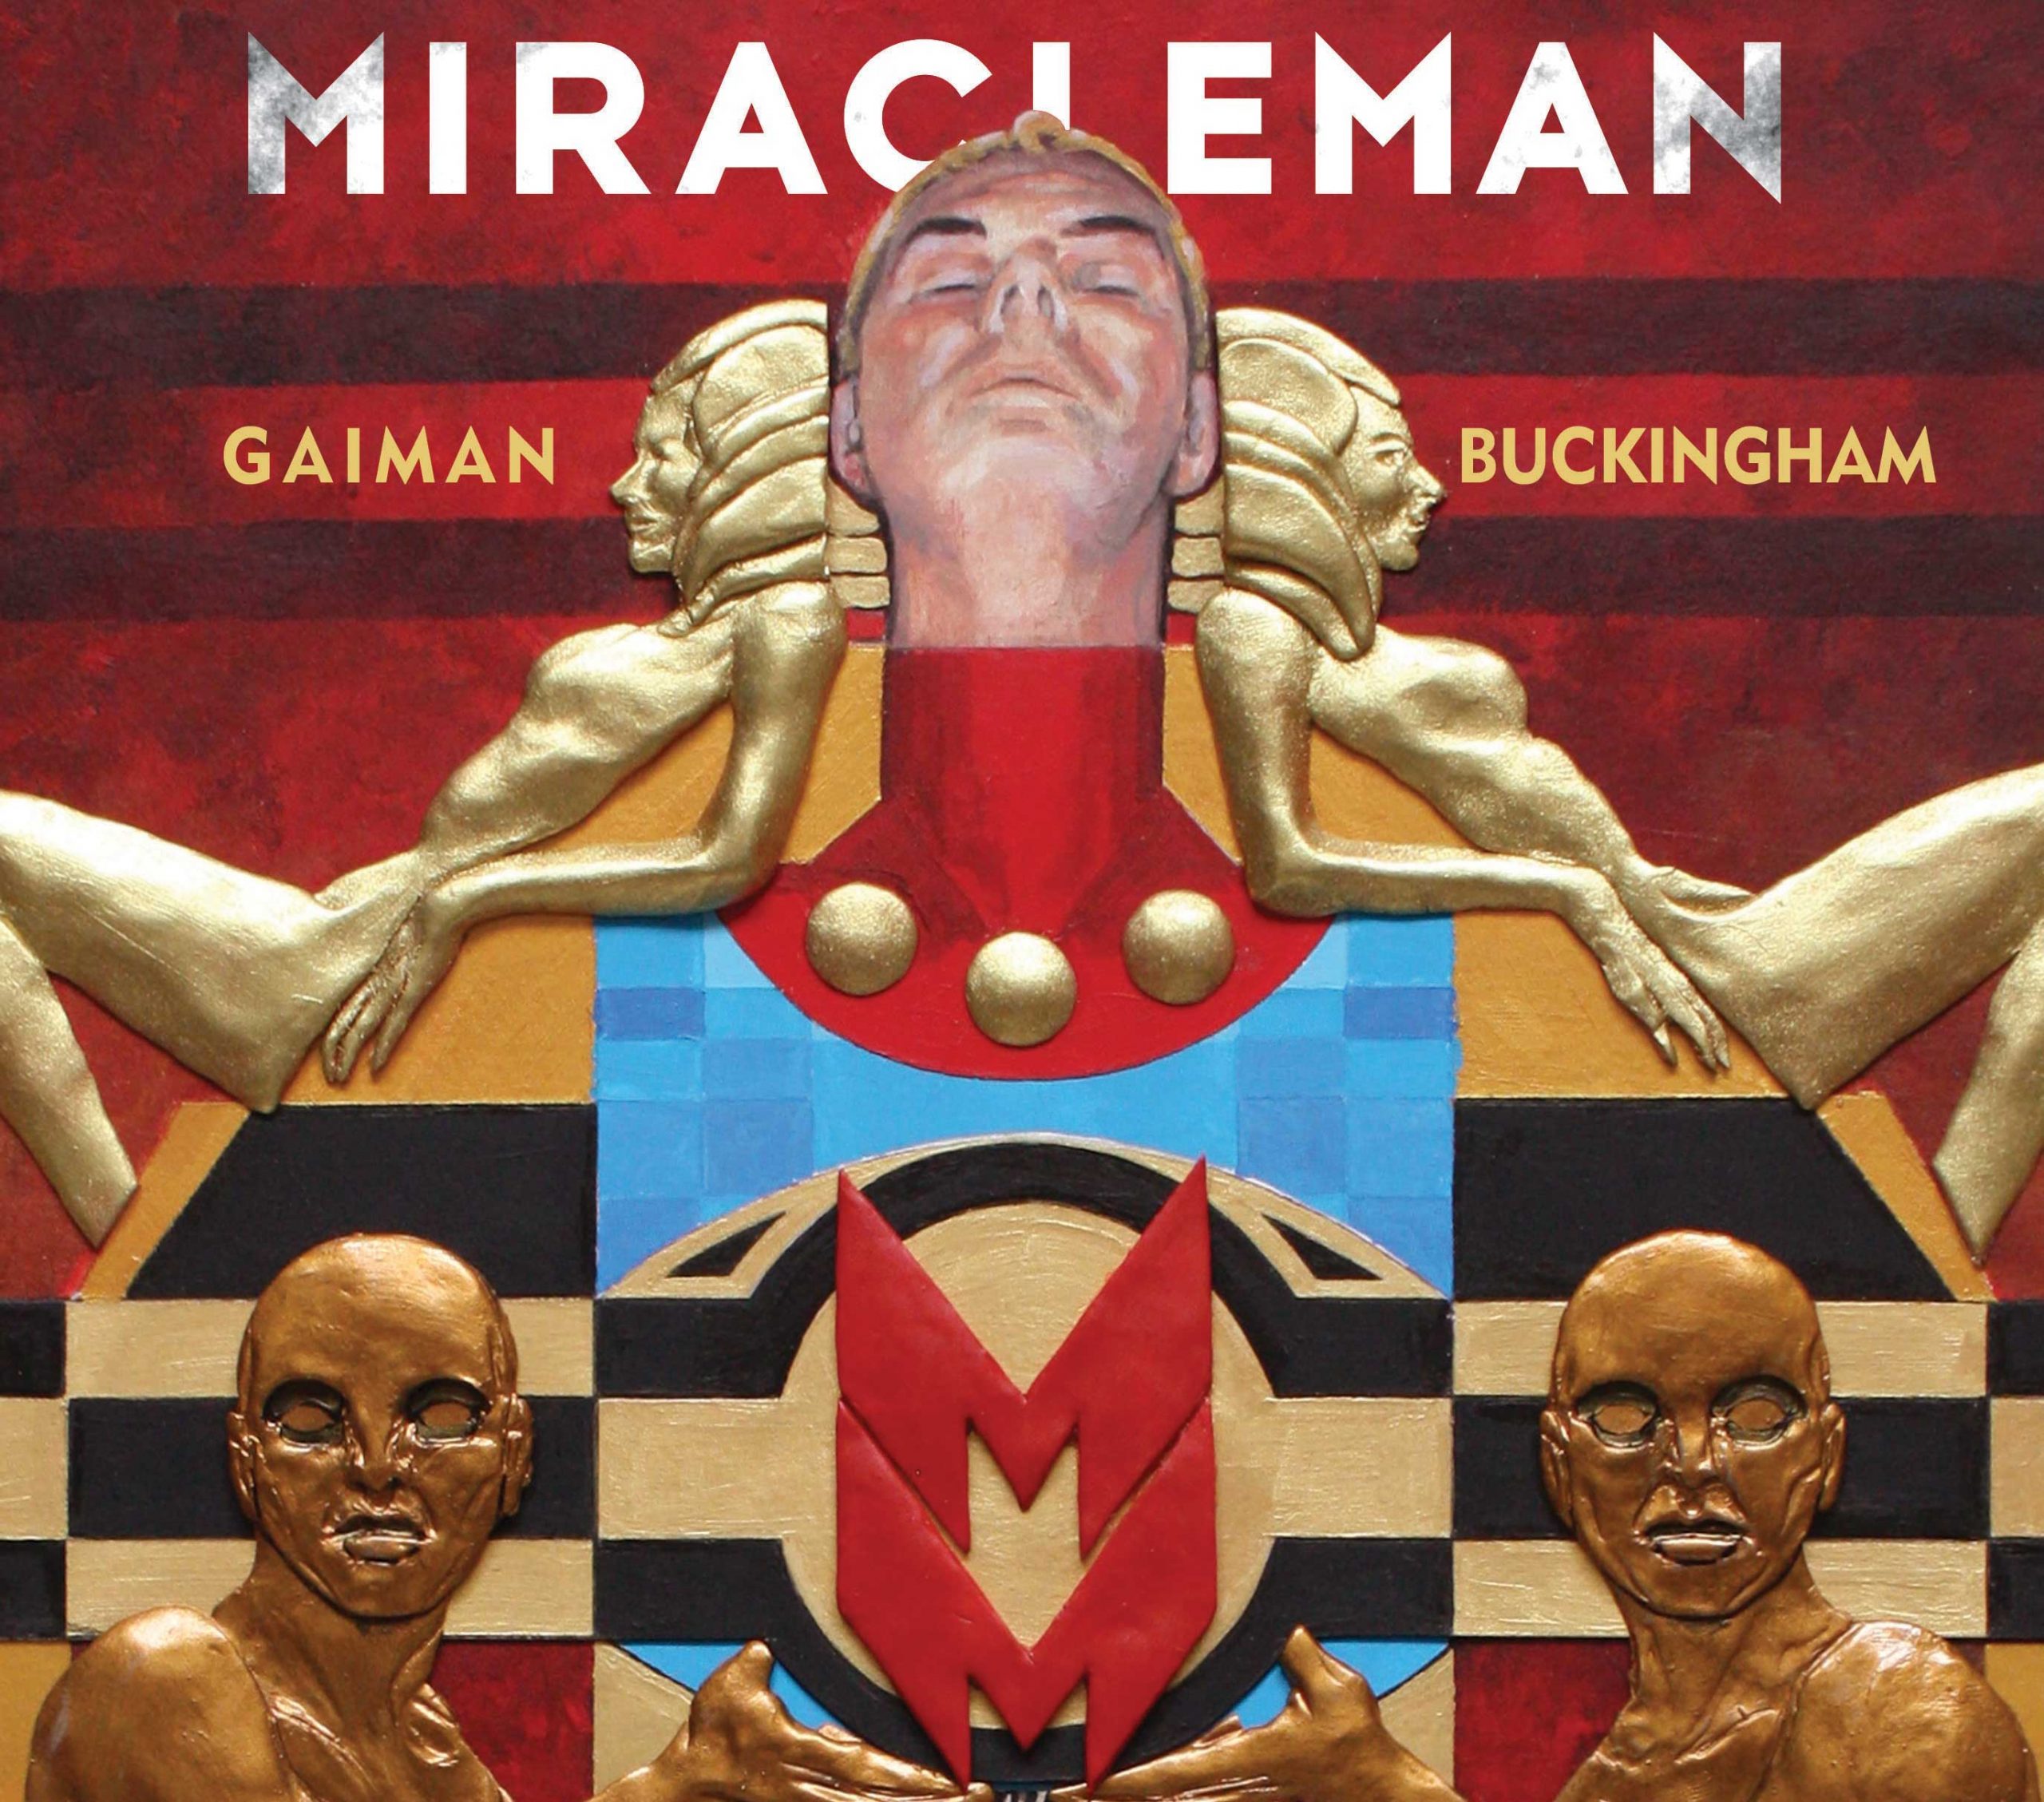 'Miracleman' Book 1 by Neil Gaiman and Mark Buckingham coming this October